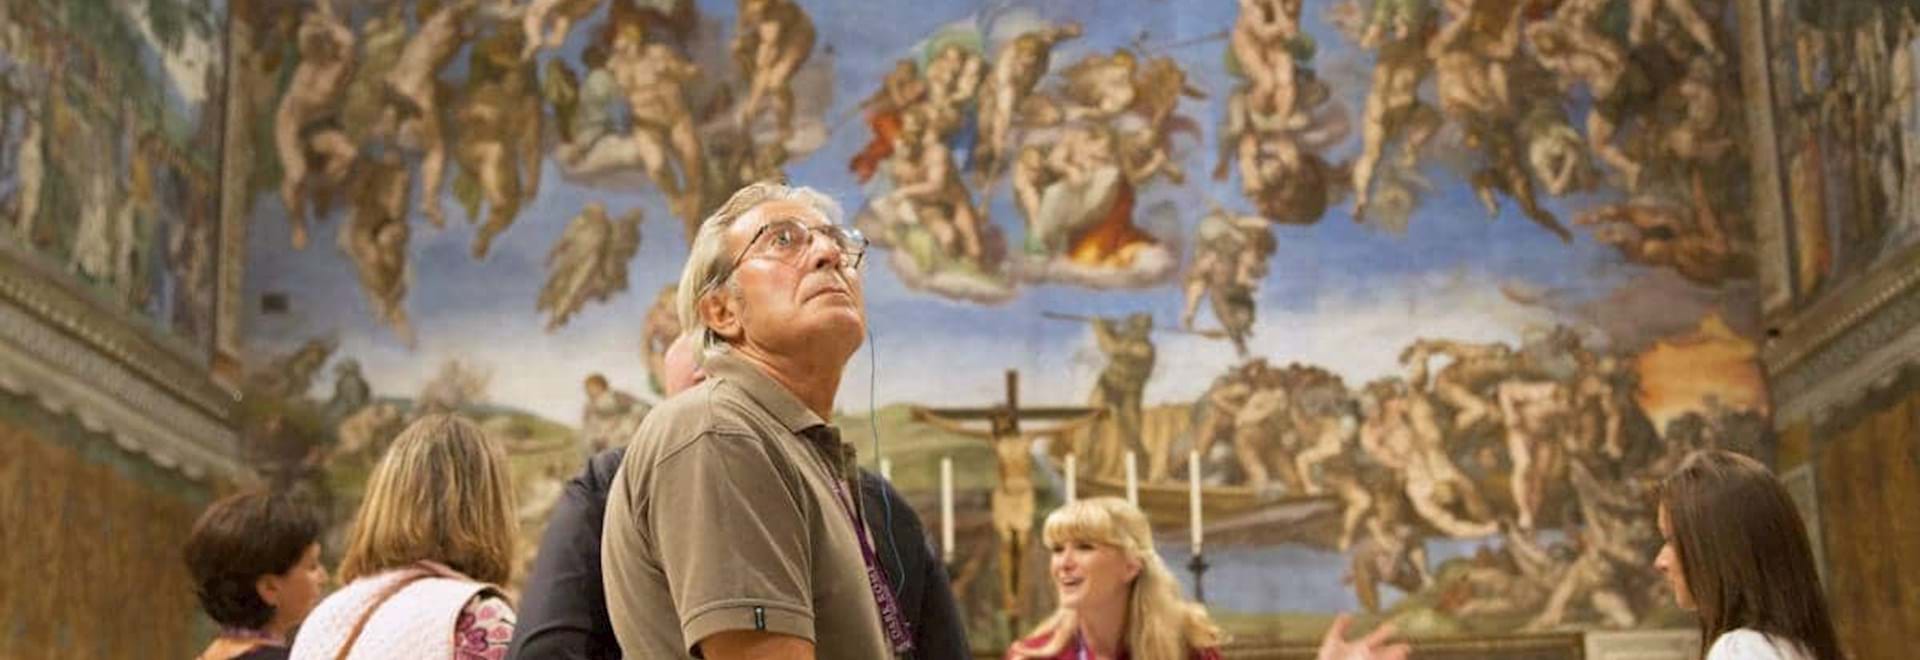 Guided tour of the Sistine Chapel